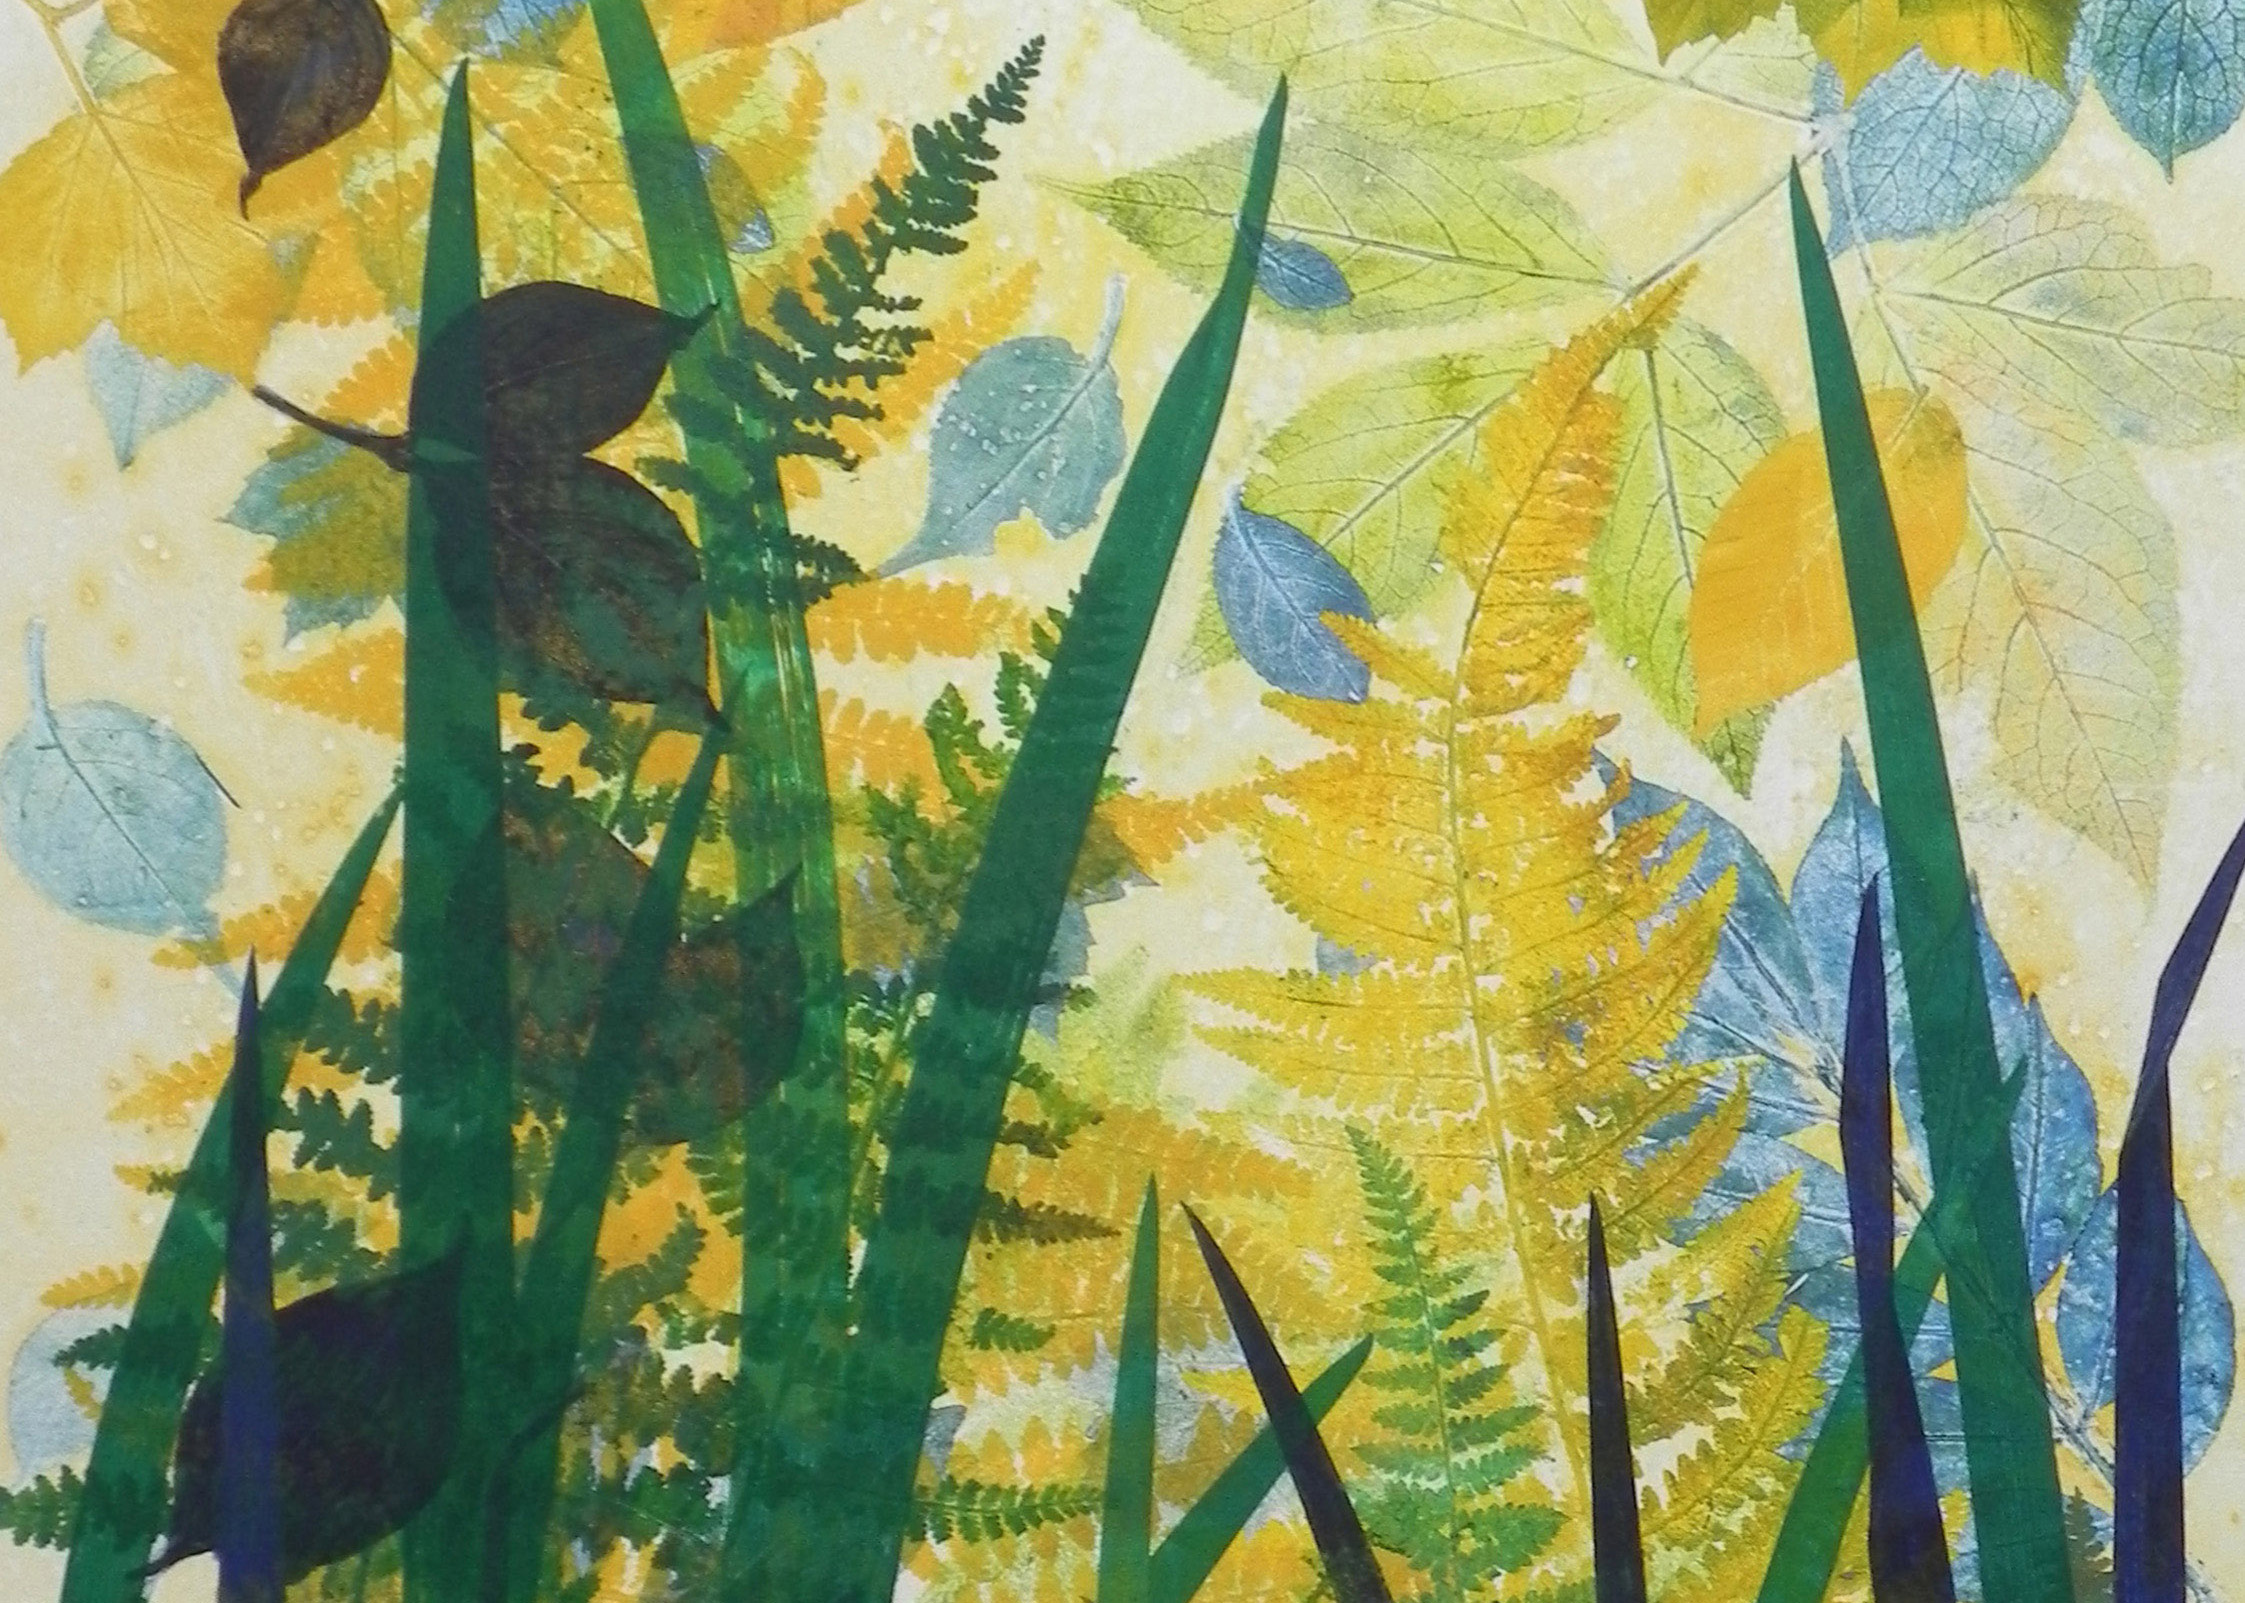 Print with a cream background. Across the top are leaves printed in yellows, greens, and blues. At the bottom are deep green stems and grasses.